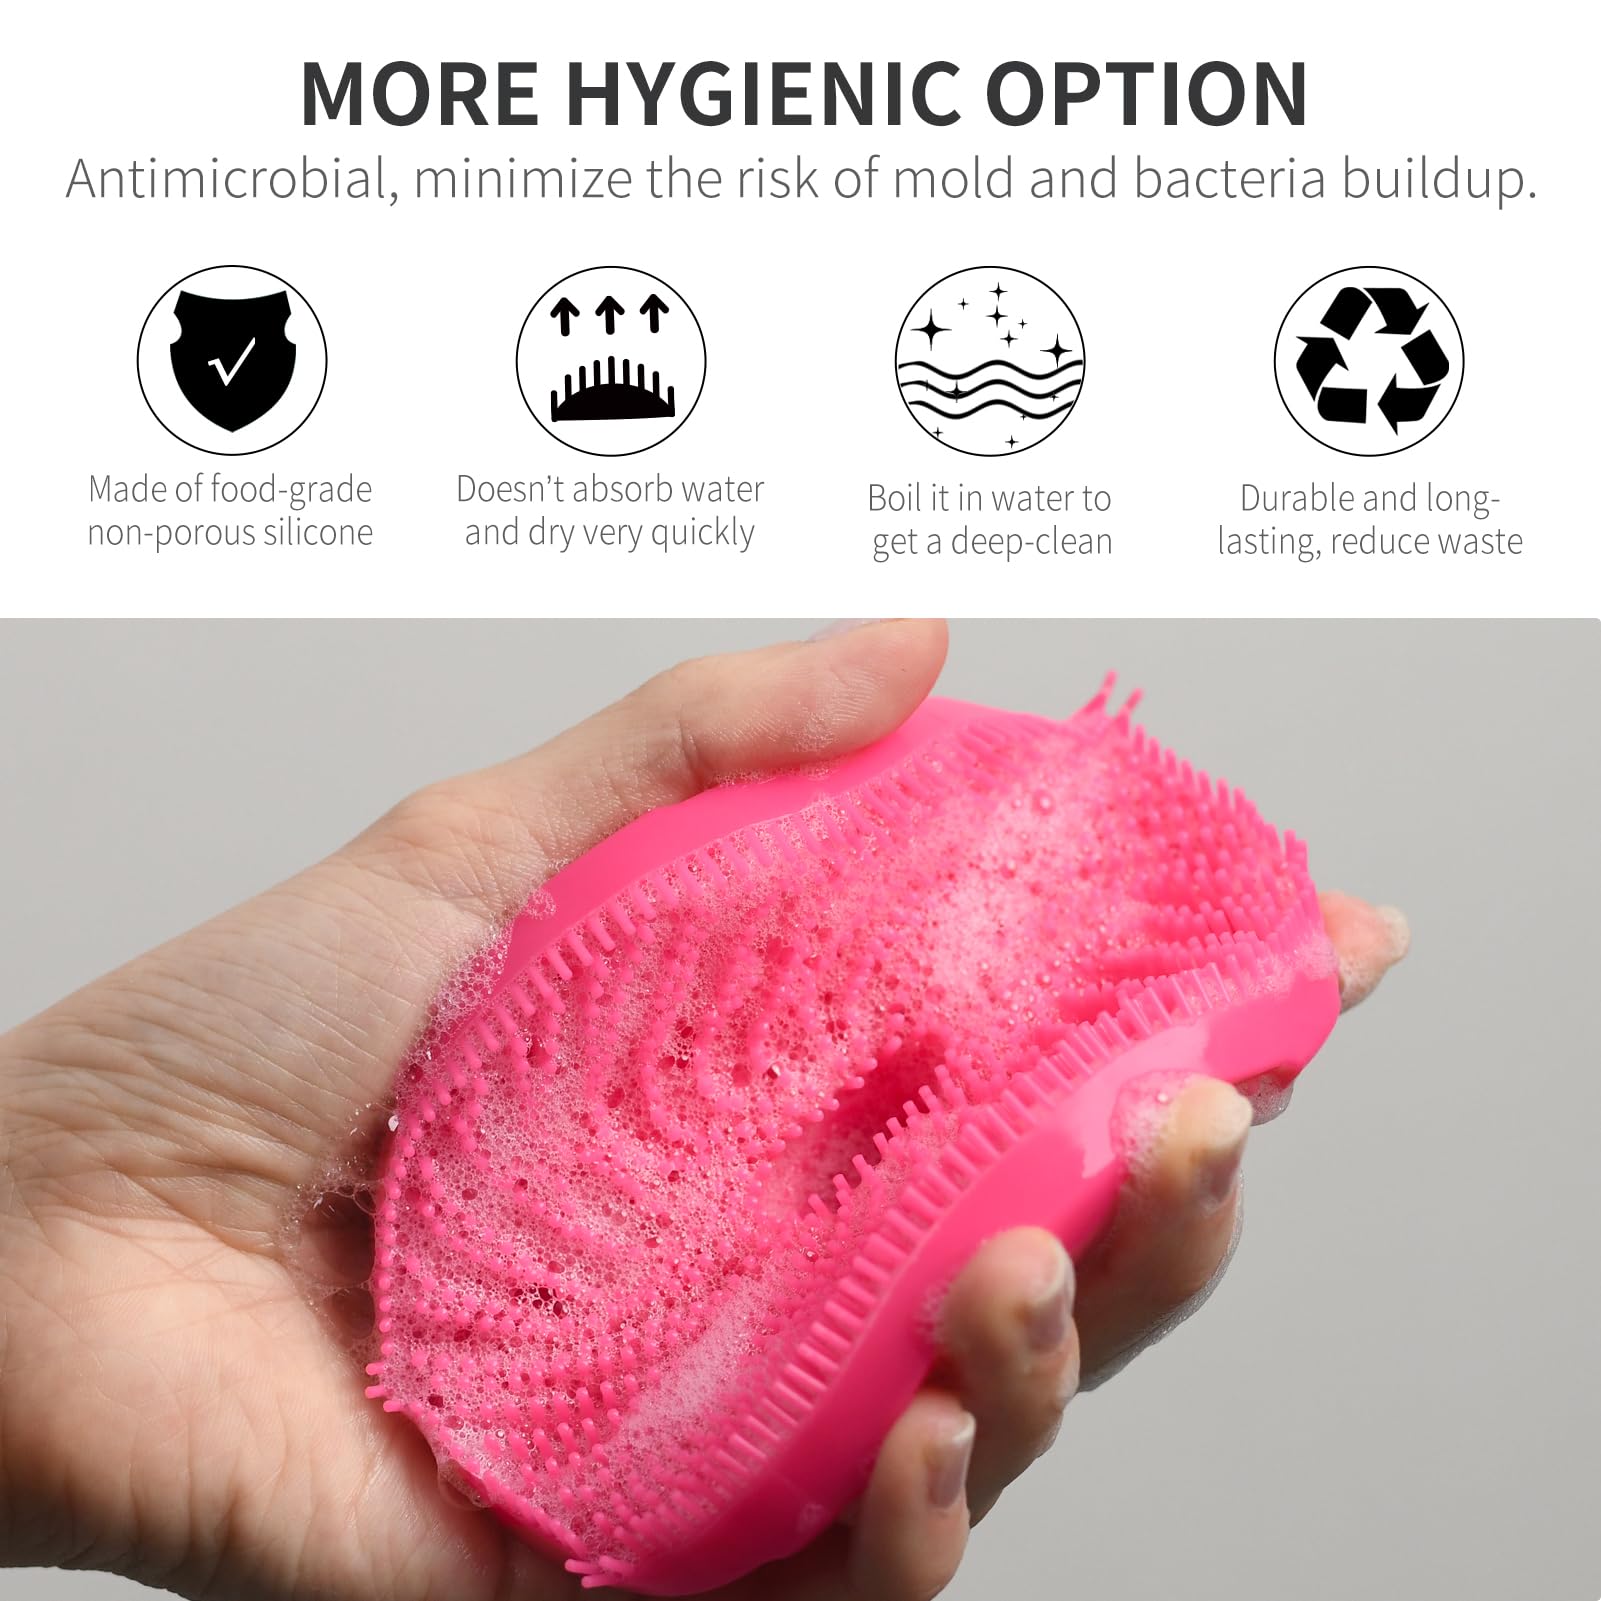 BEAUTAIL Silicone Body Scrubber, Upgrade 3rd Generation Shower Bath Brush, Lather Nicely, Soft Massage Body, More Hygienic Than Traditional Loofah, Gentle Exfoliating for Sensitive Skin, 1 Pack, Rose